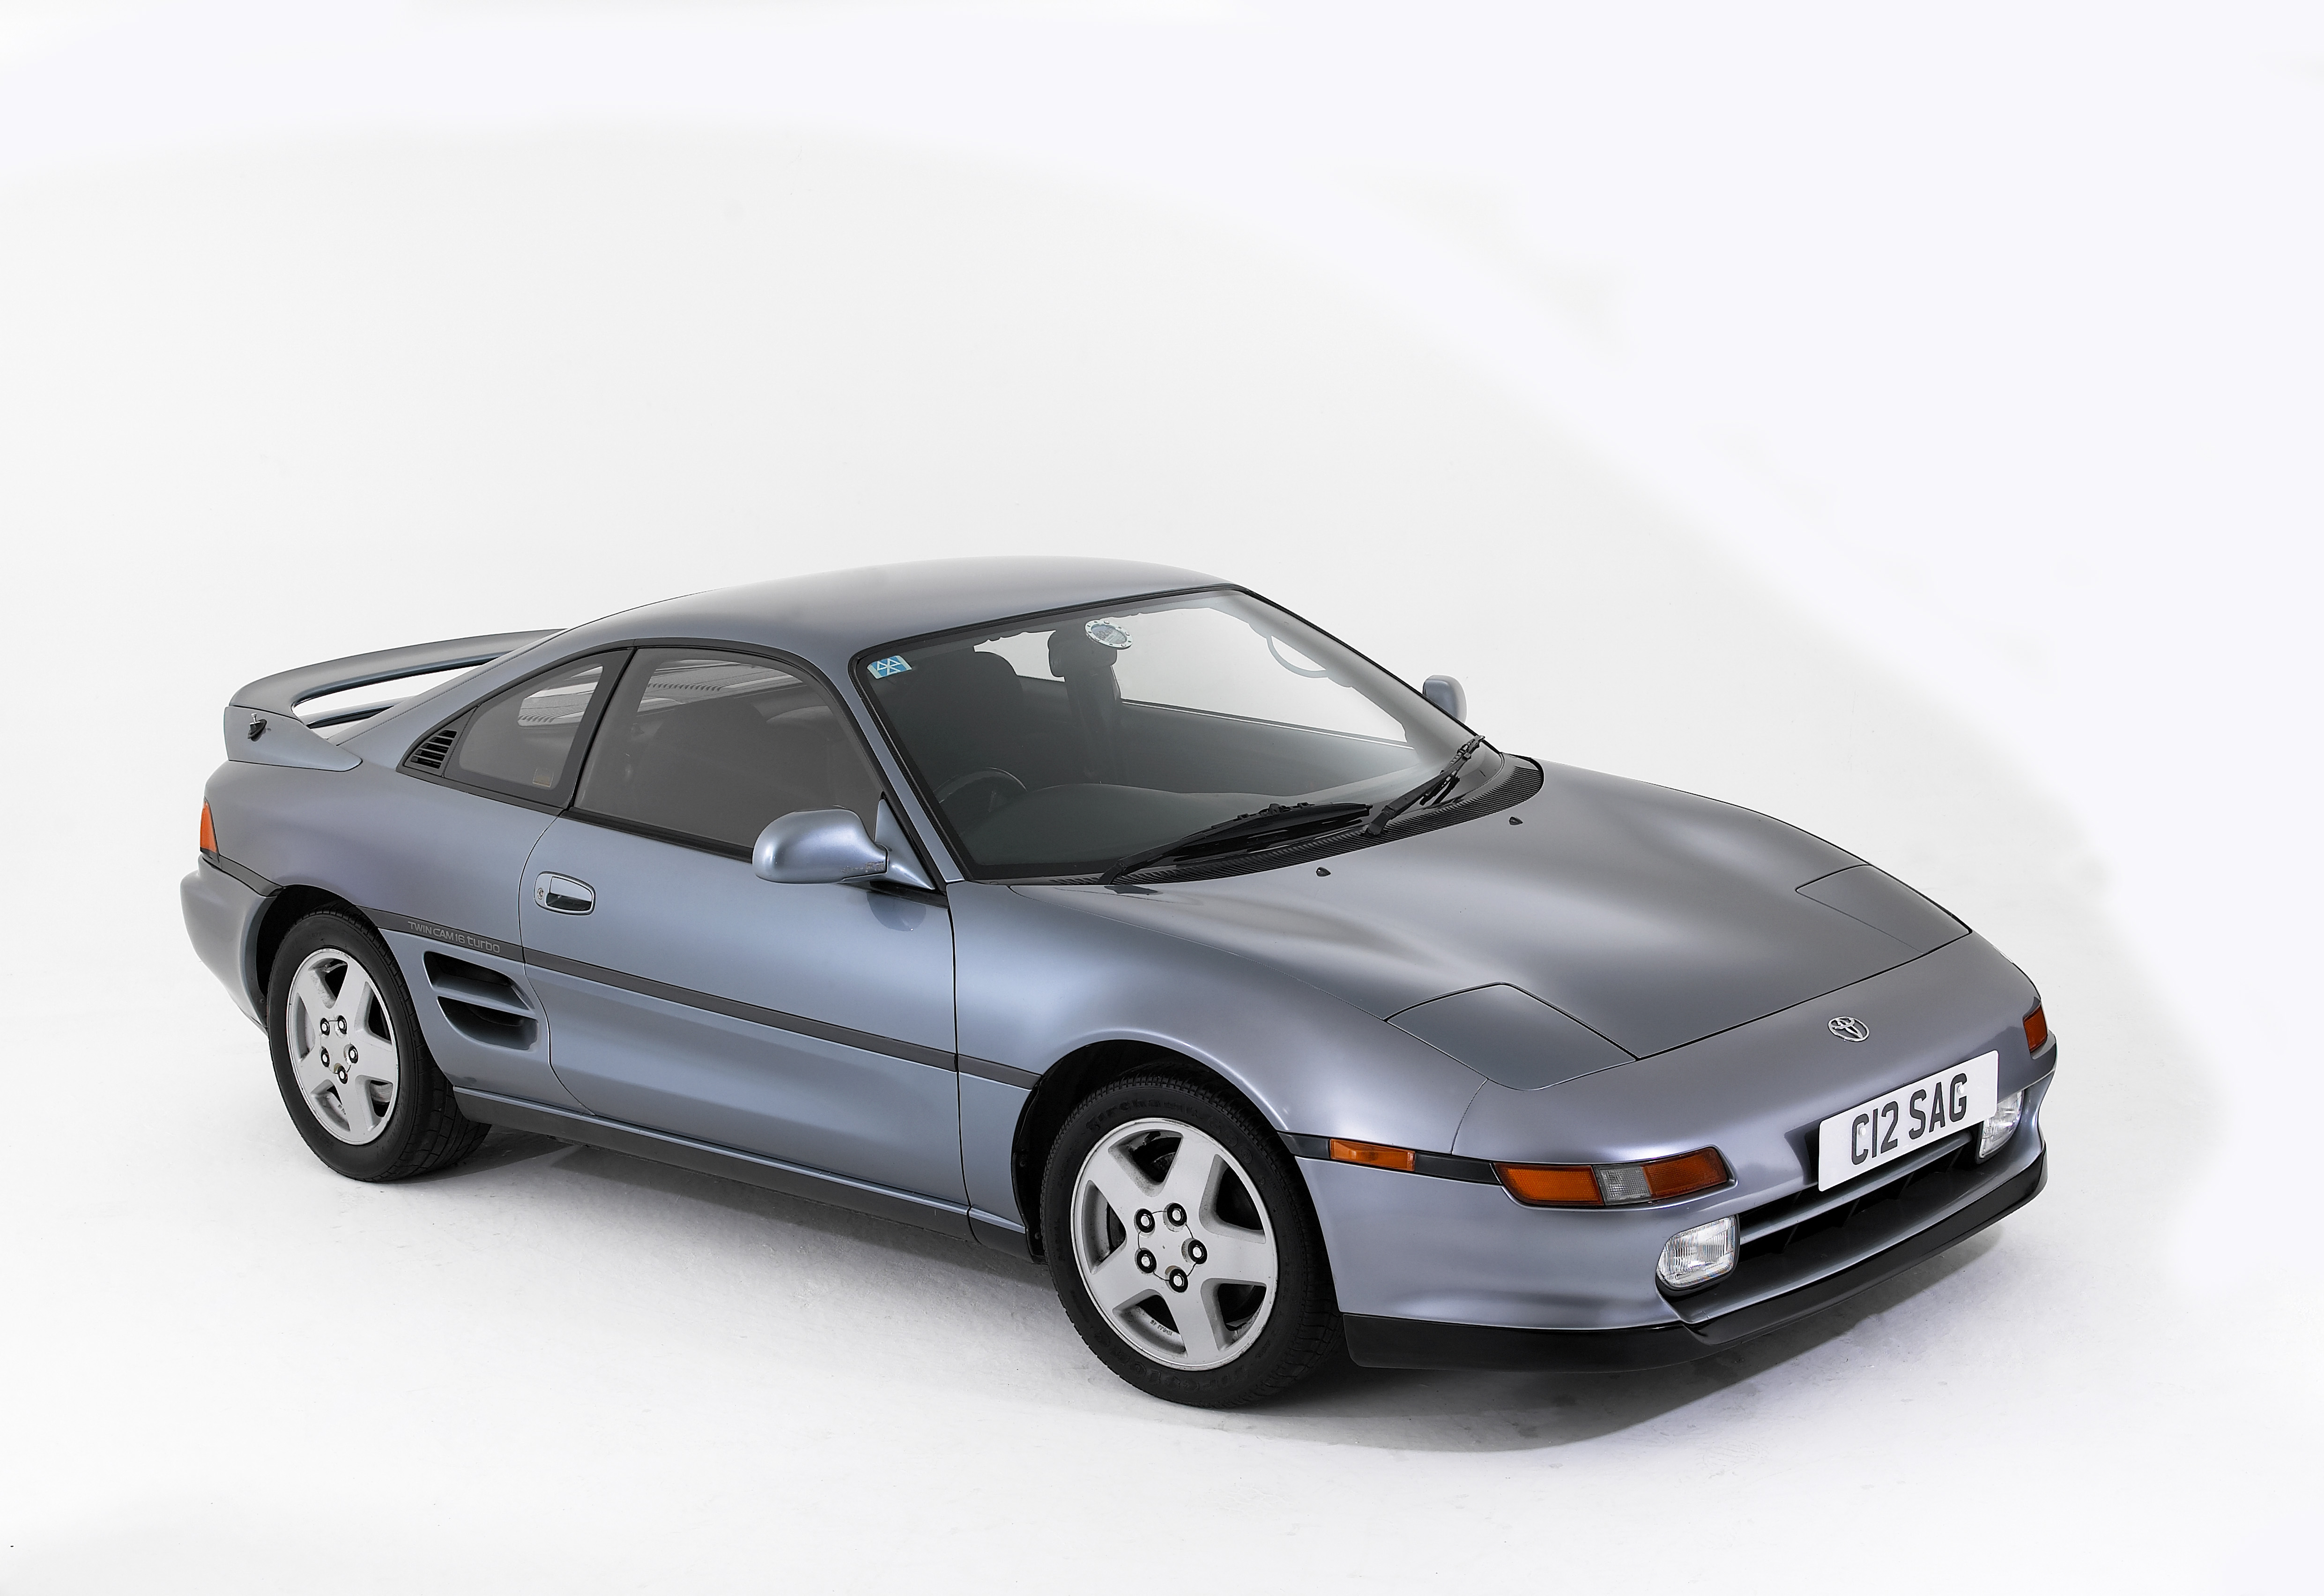 Toyota may be bringing back the MR2 after 20 years